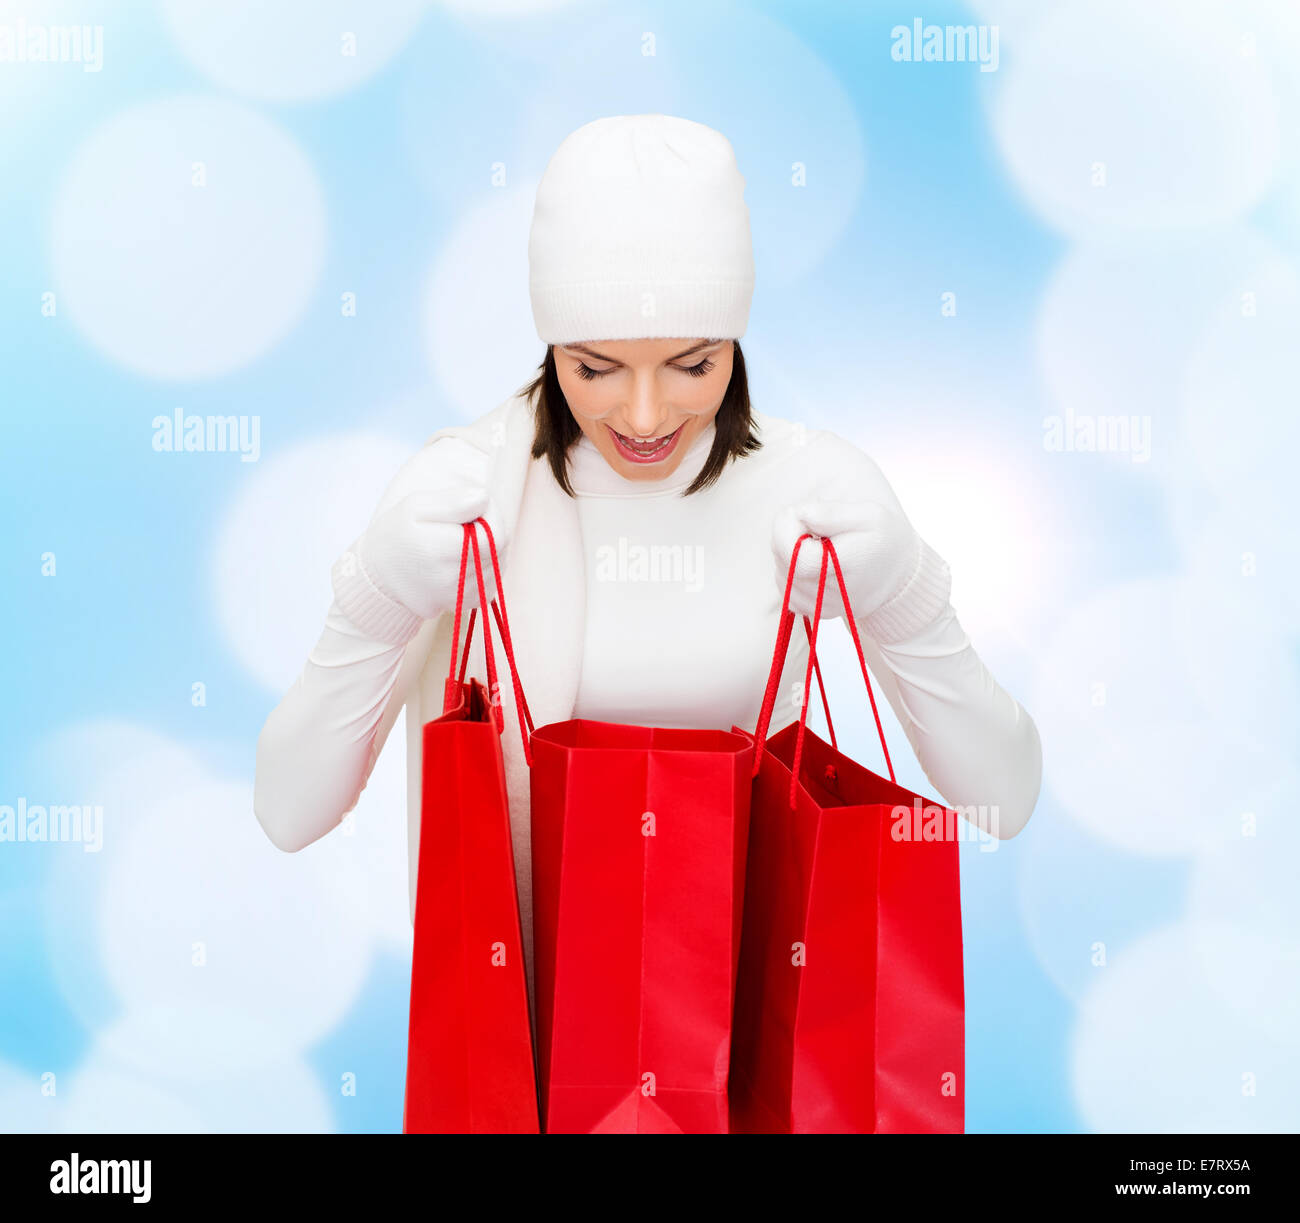 smiling young woman with red shopping bags Stock Photo